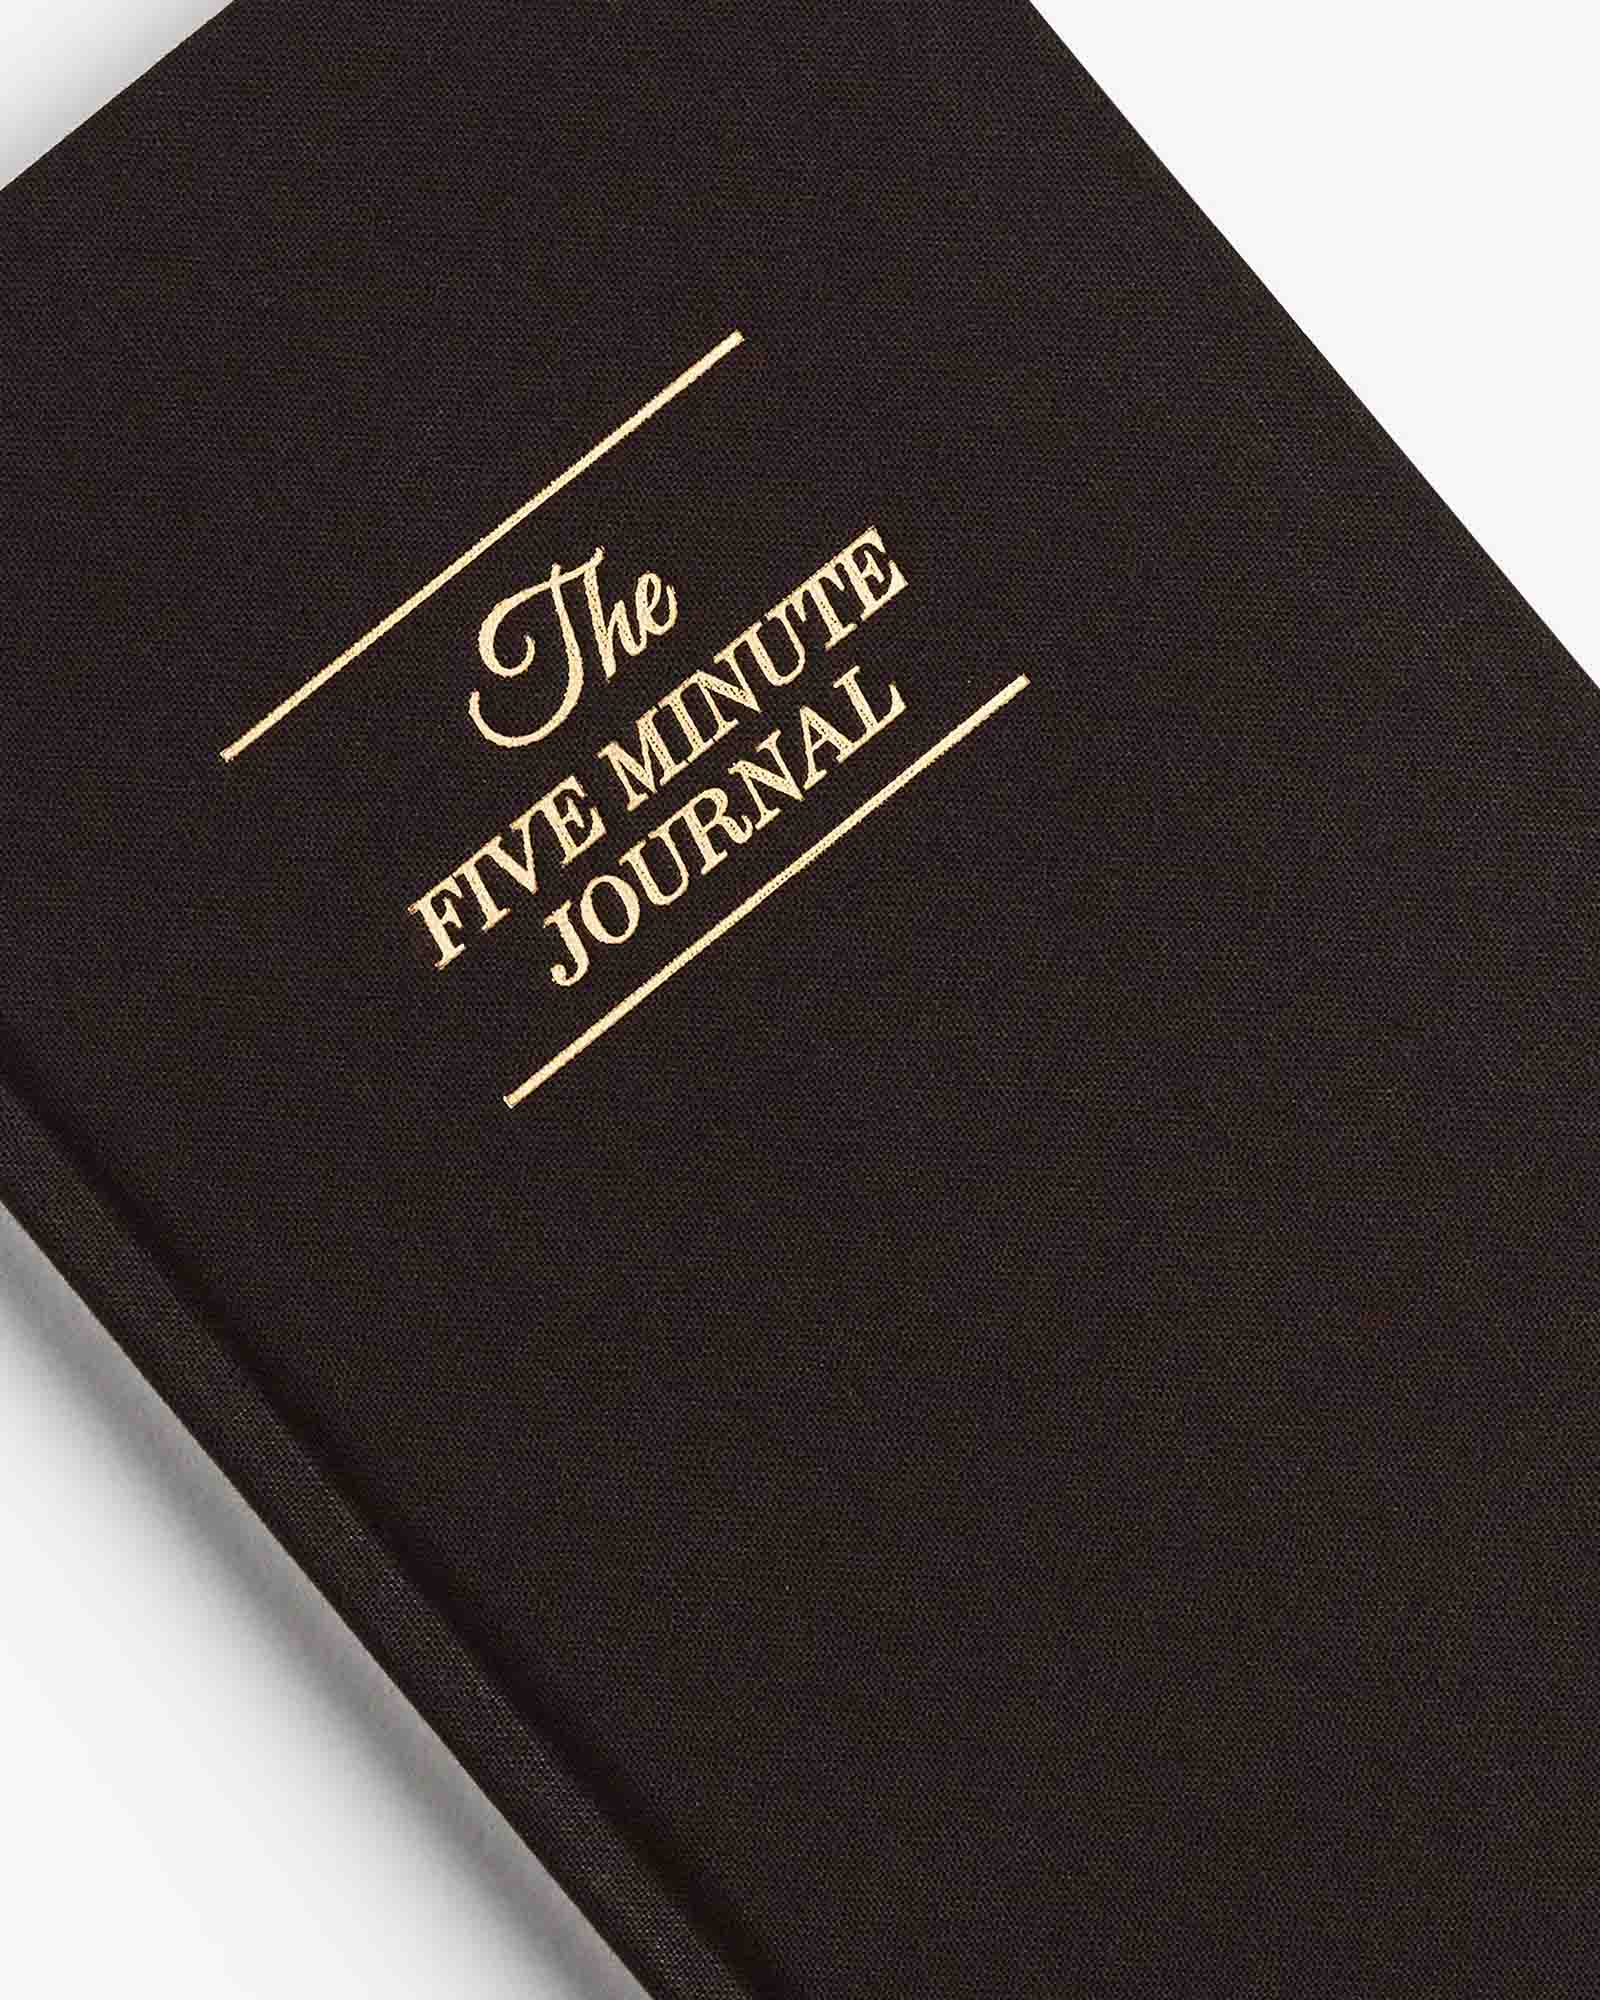  The Five Minute Journal - Bold Black by Intelligent Change Intelligent Change Perfumarie